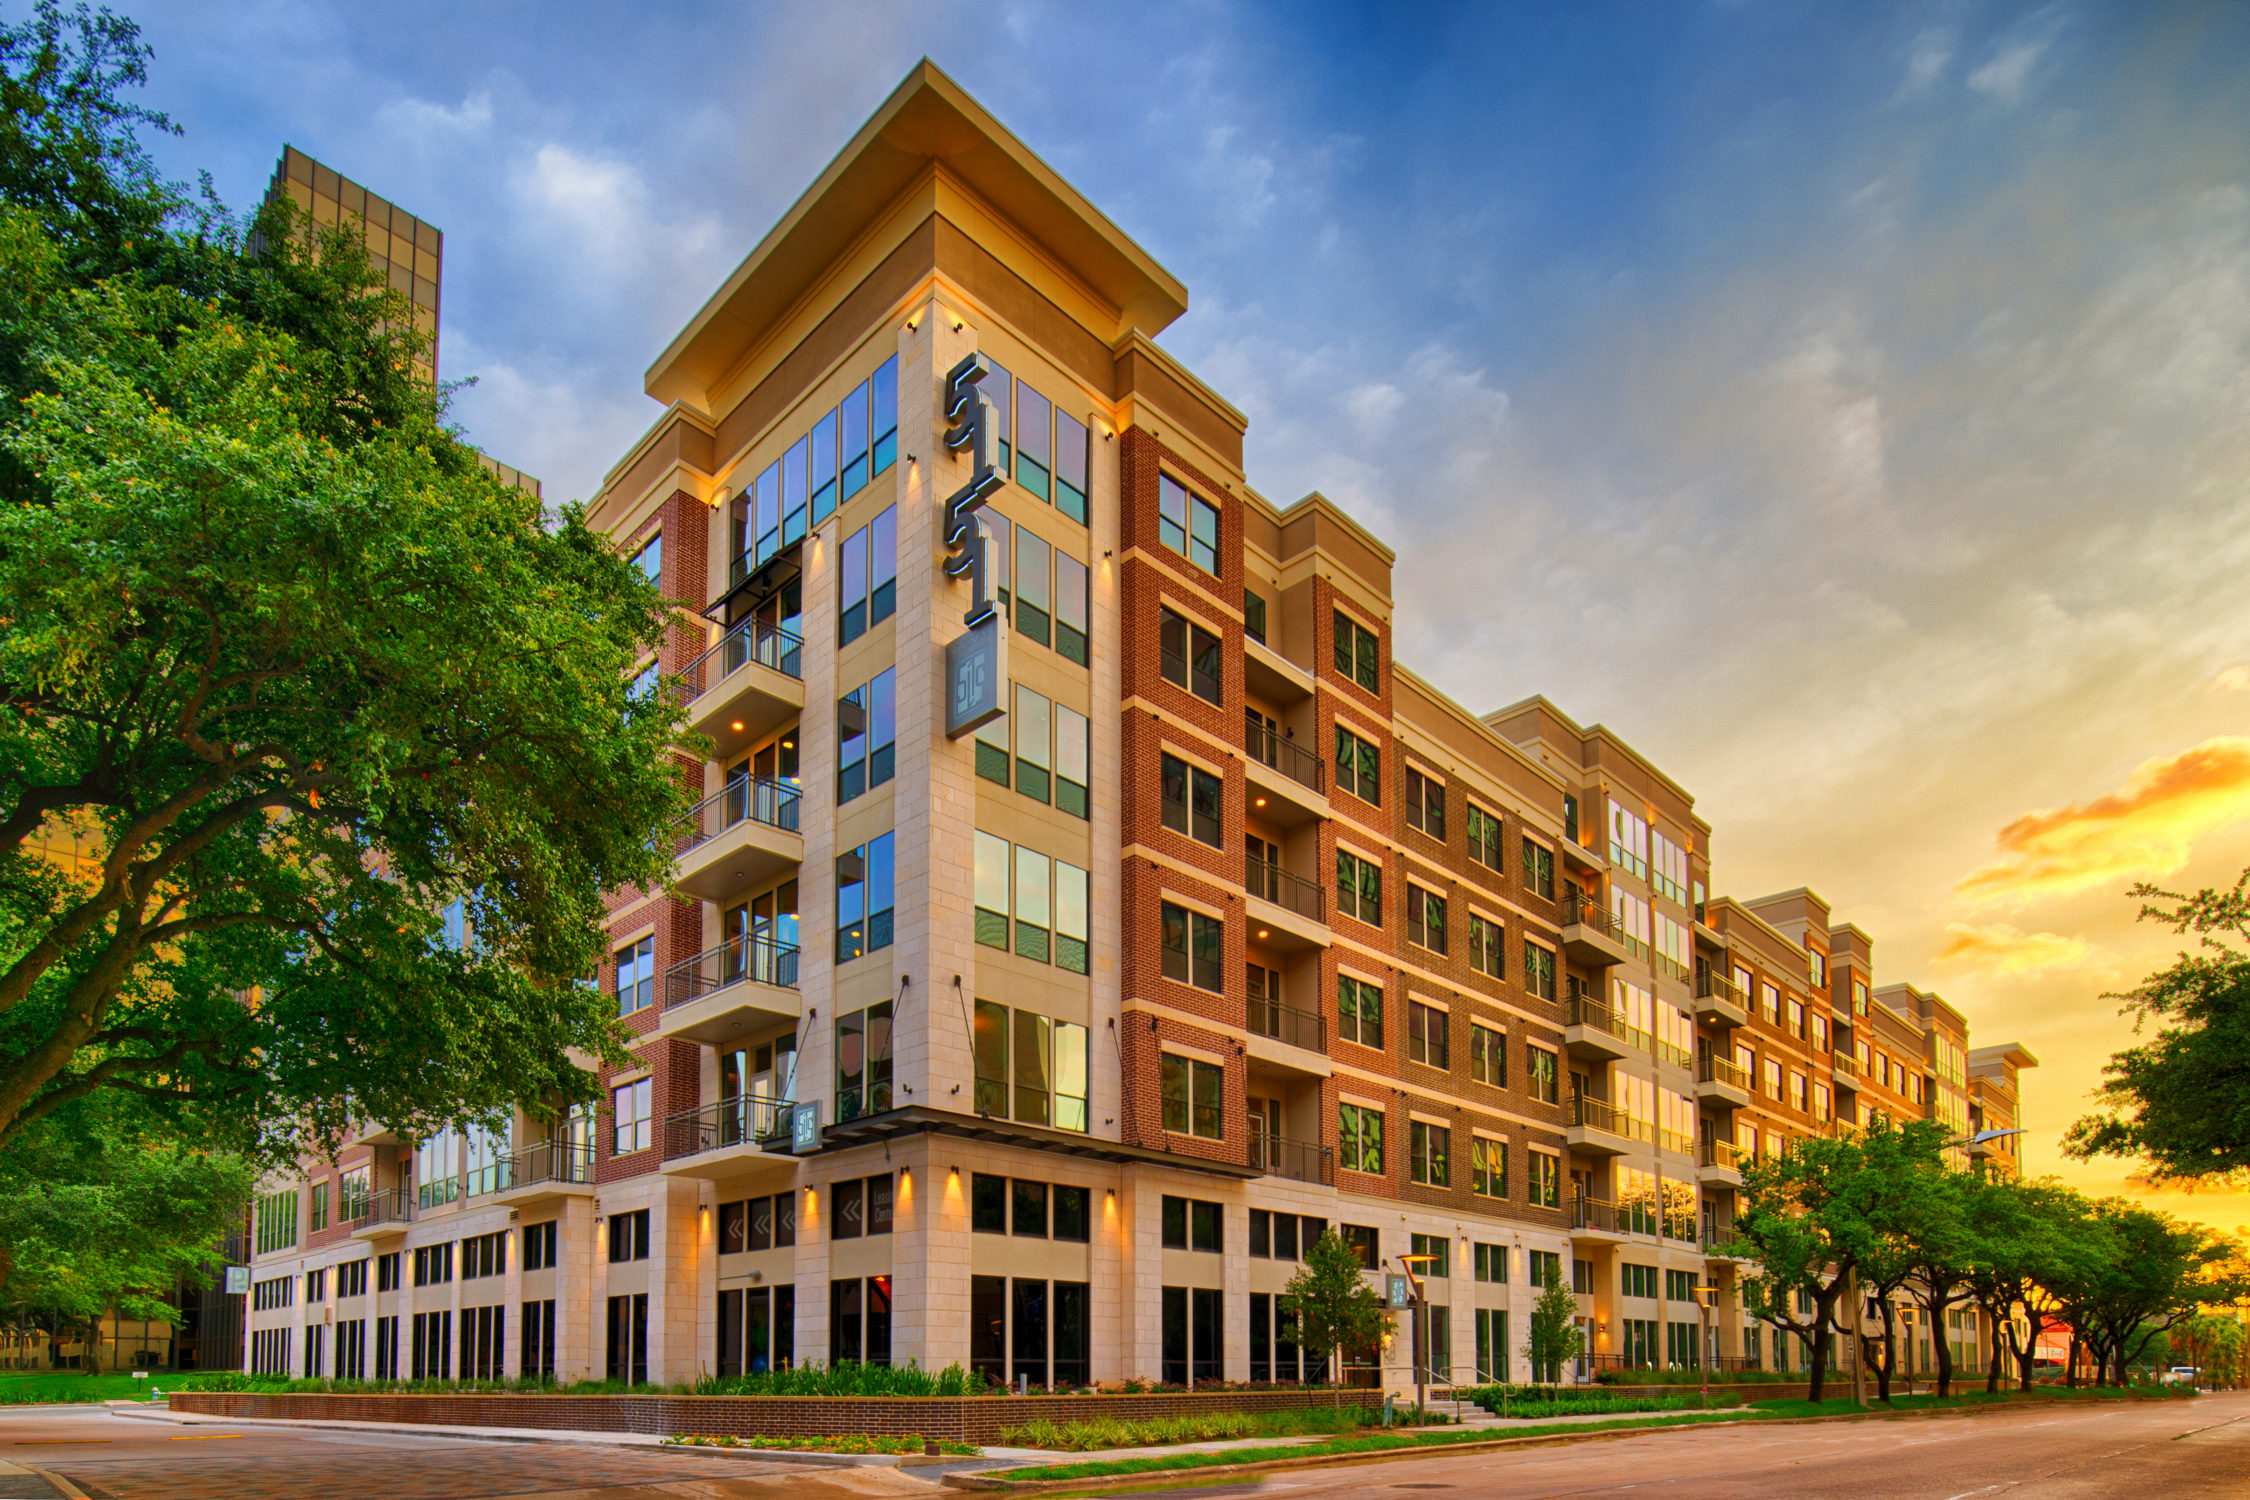 Alexan 5151-Houston TX - Exterior building is magnificent within the Houston Galleria area